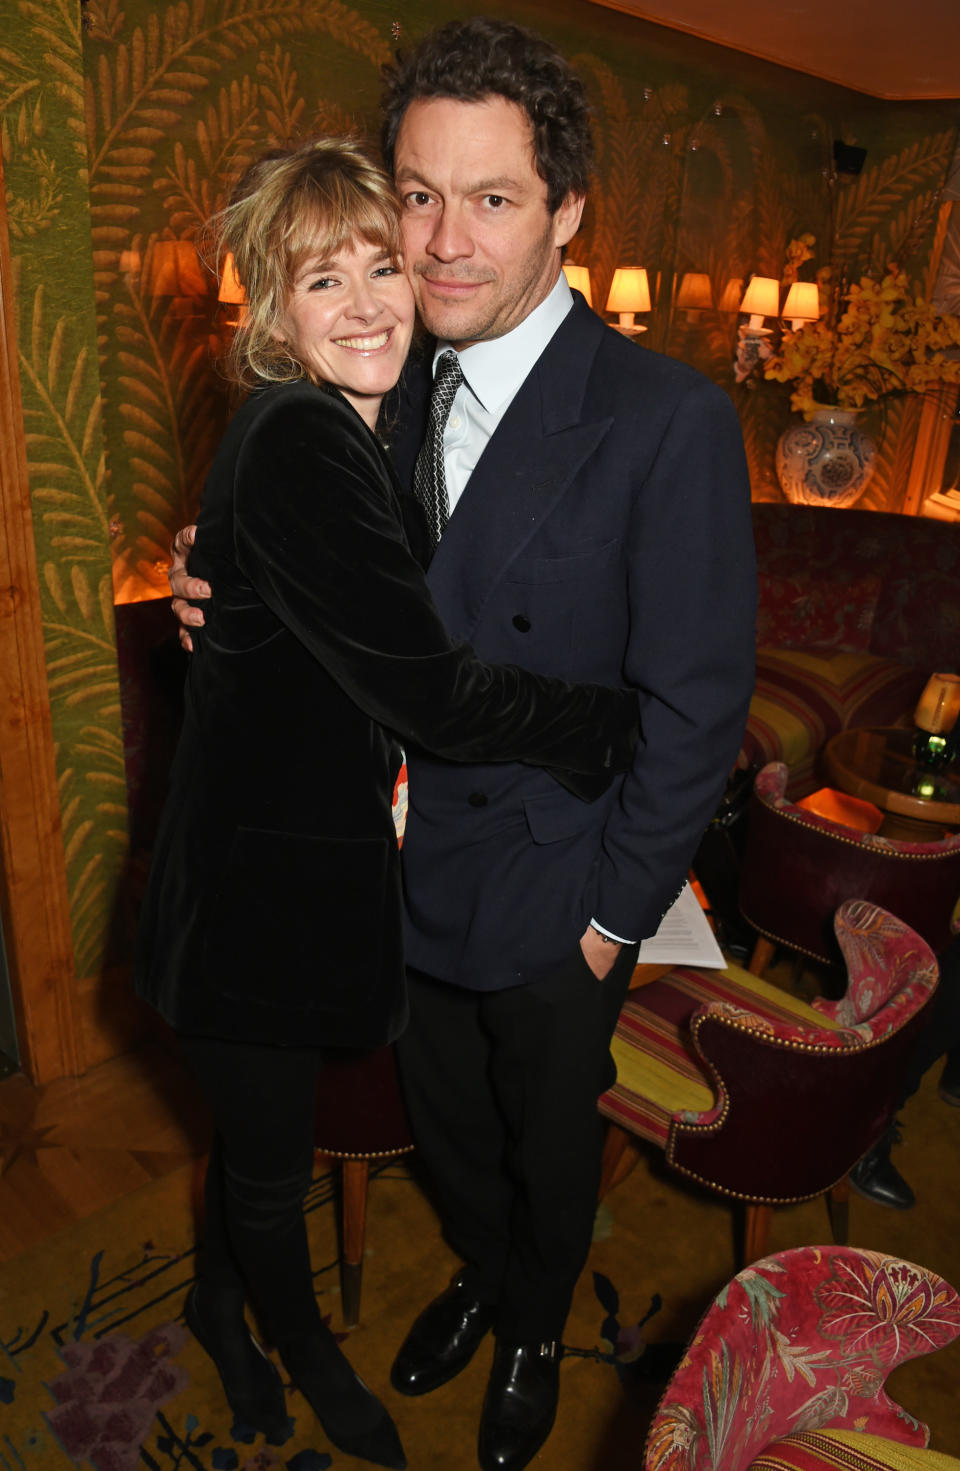 Catherine and Dominic attend the Farms Not Factories #TurnYourNoseUp at Pig Factories benefit dinner 'Upstairs' at 5 Hertford Street on January 31, 2017 in London, England.